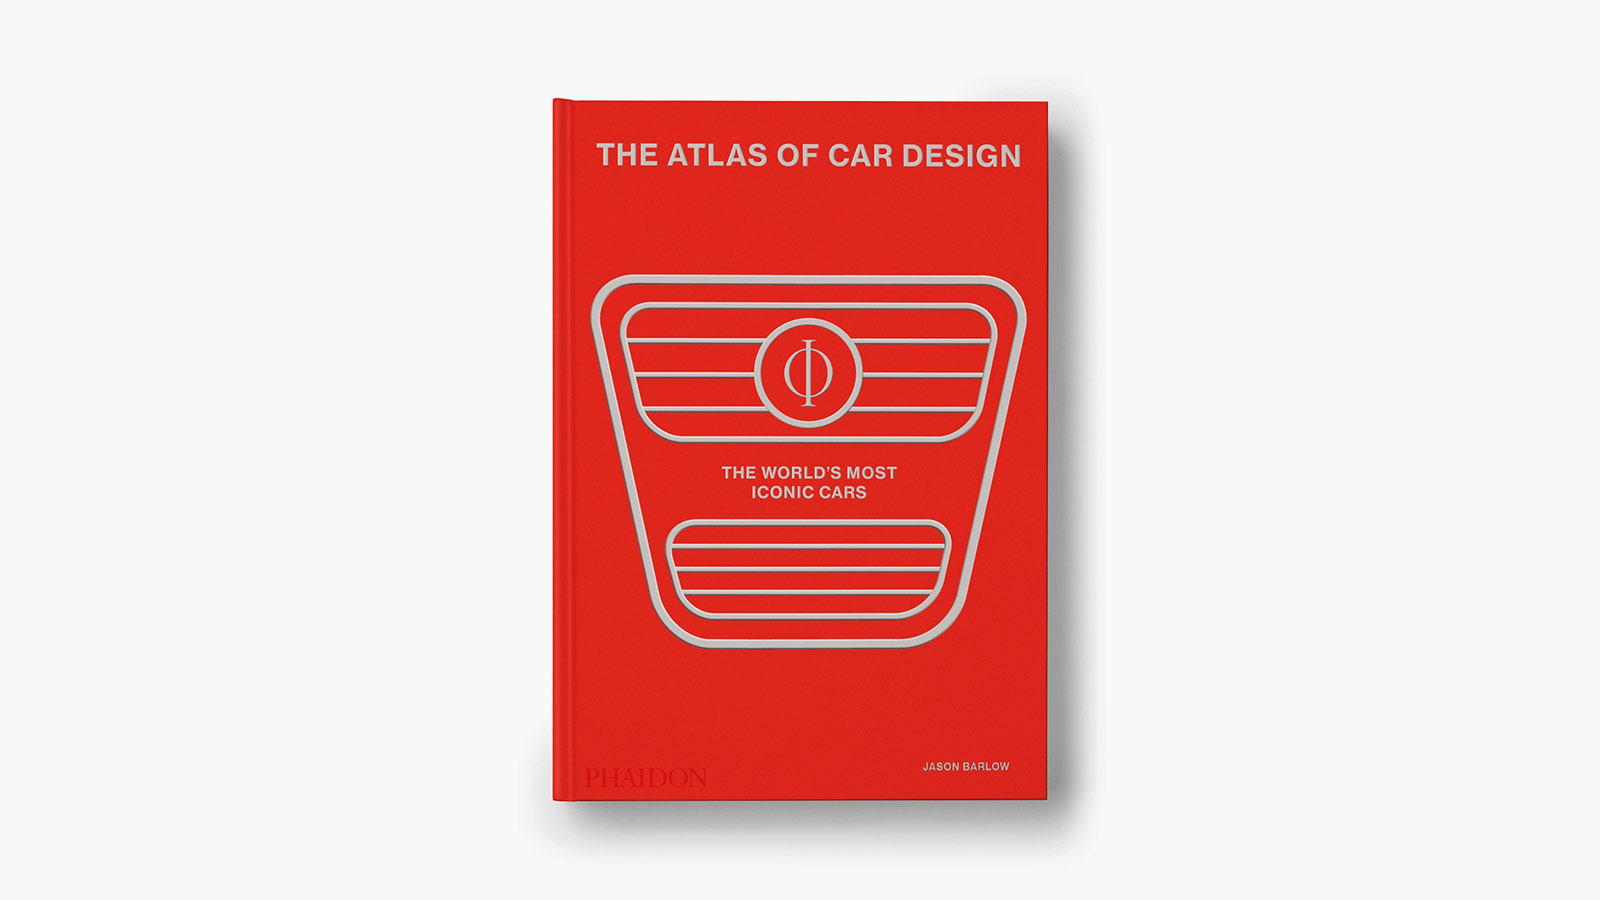 'The Atlas of Car Design: The World's Most Iconic Cars'